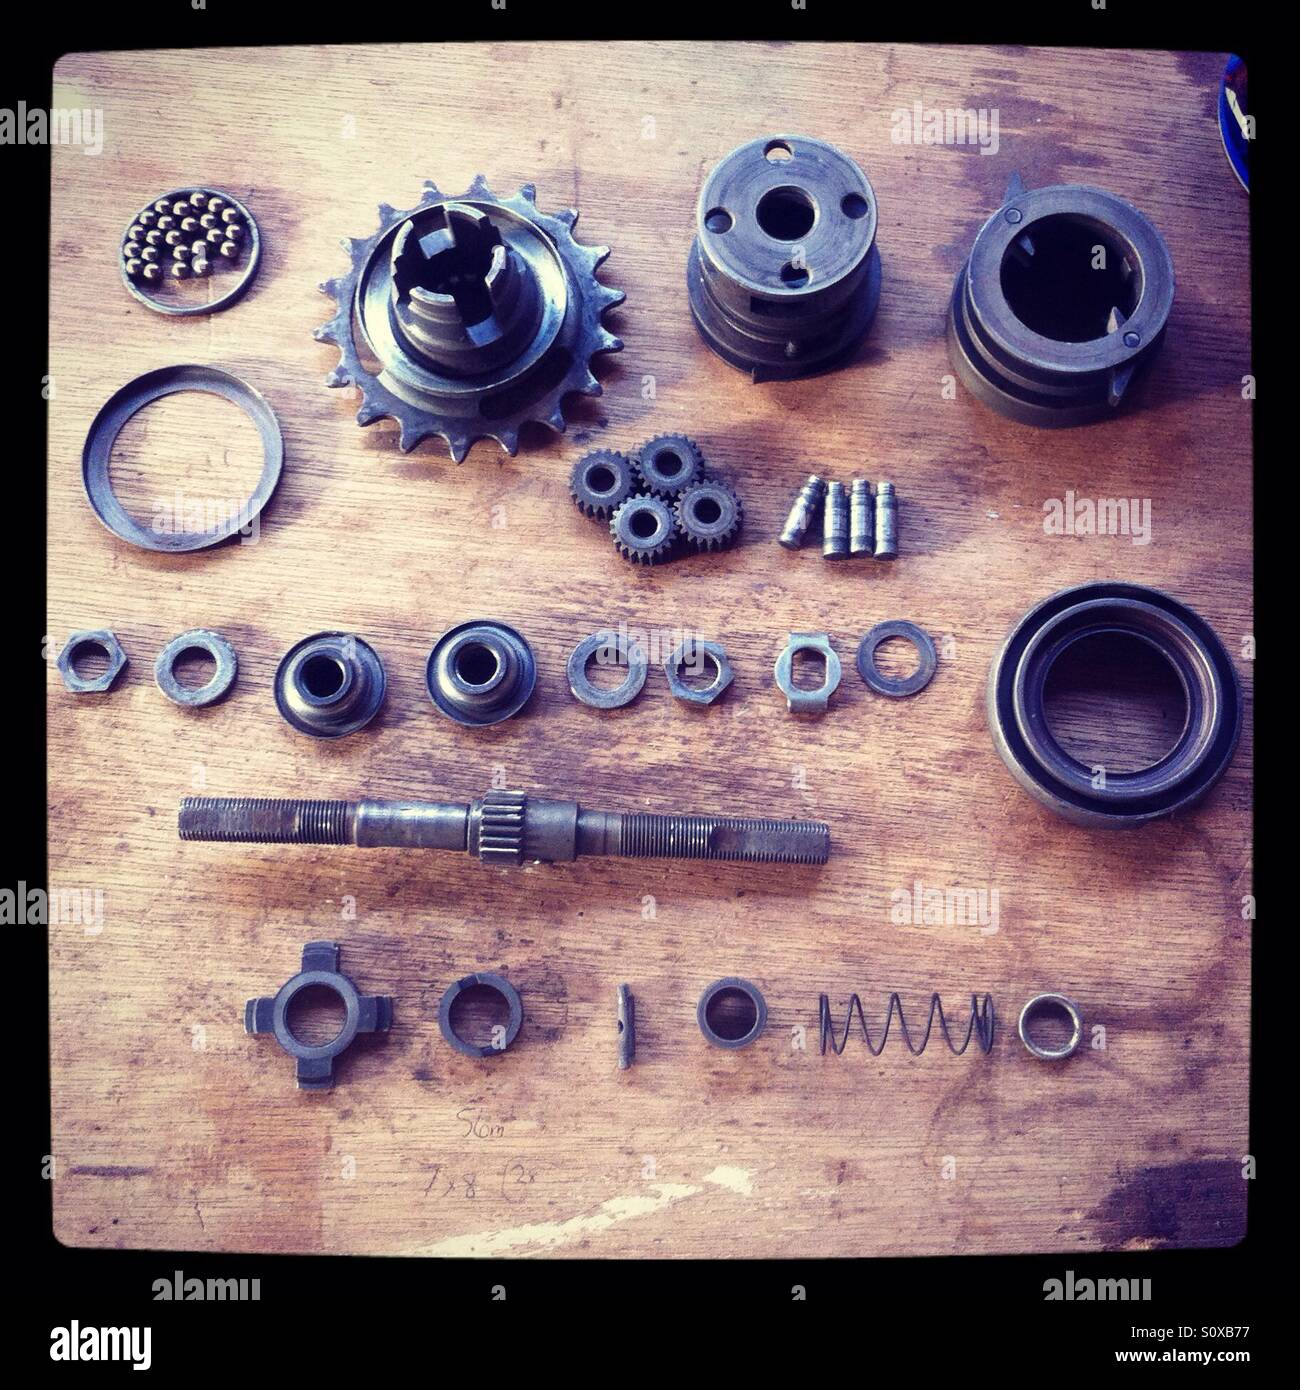 Sturmey Archer three speed bicycle gear disassembled Stock Photo